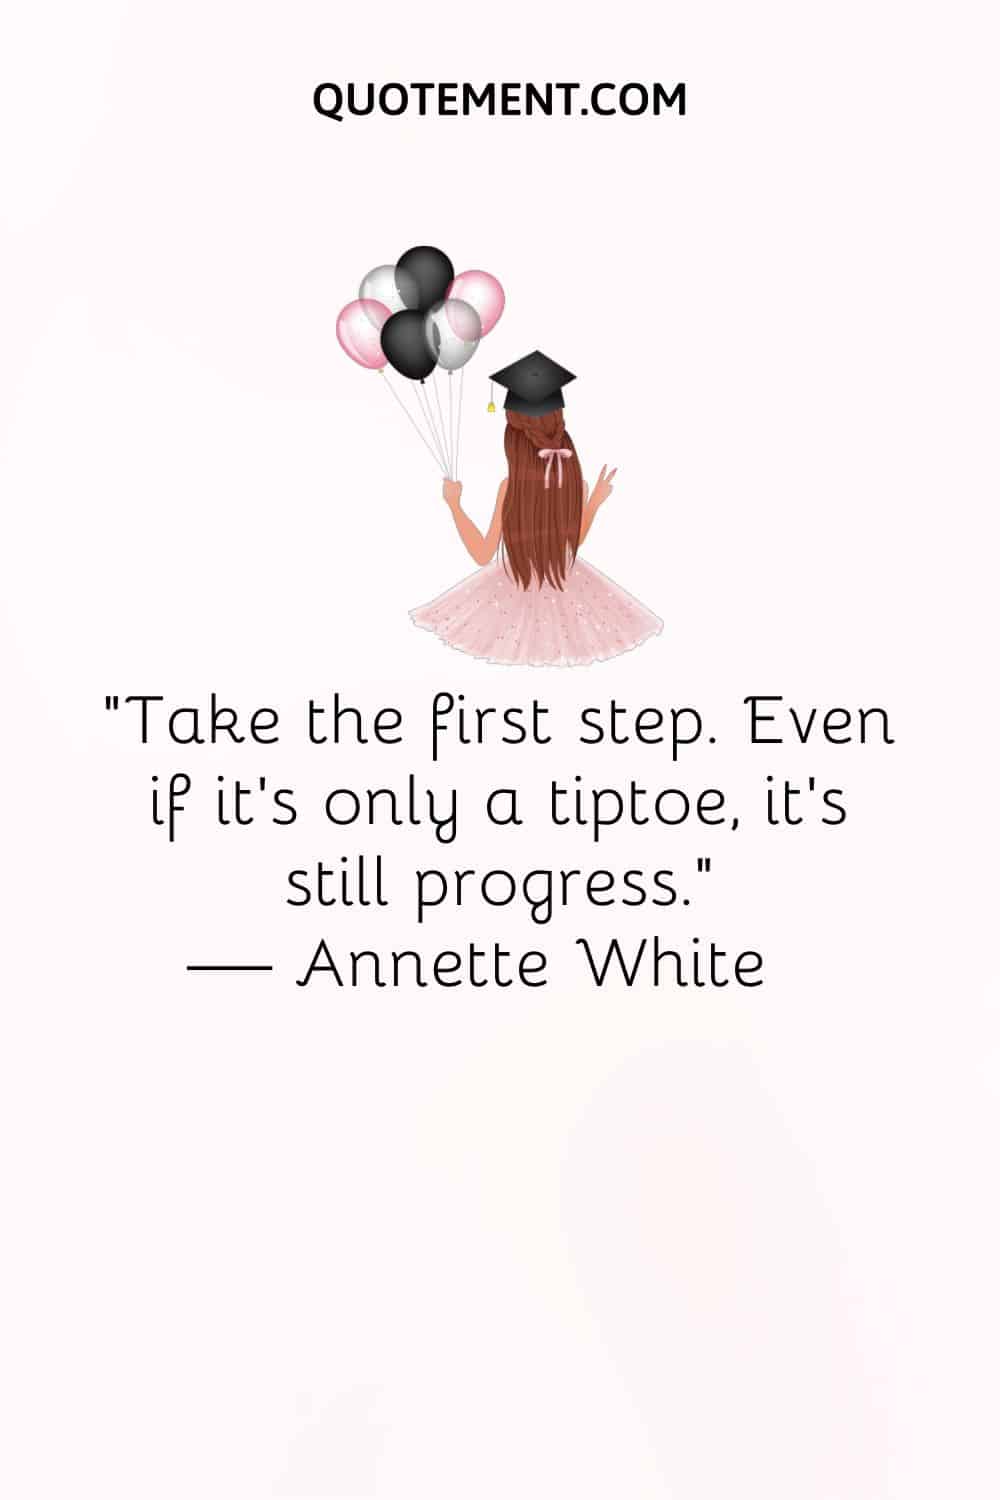 “Take the first step. Even if it’s only a tiptoe, it’s still progress.” — Annette White